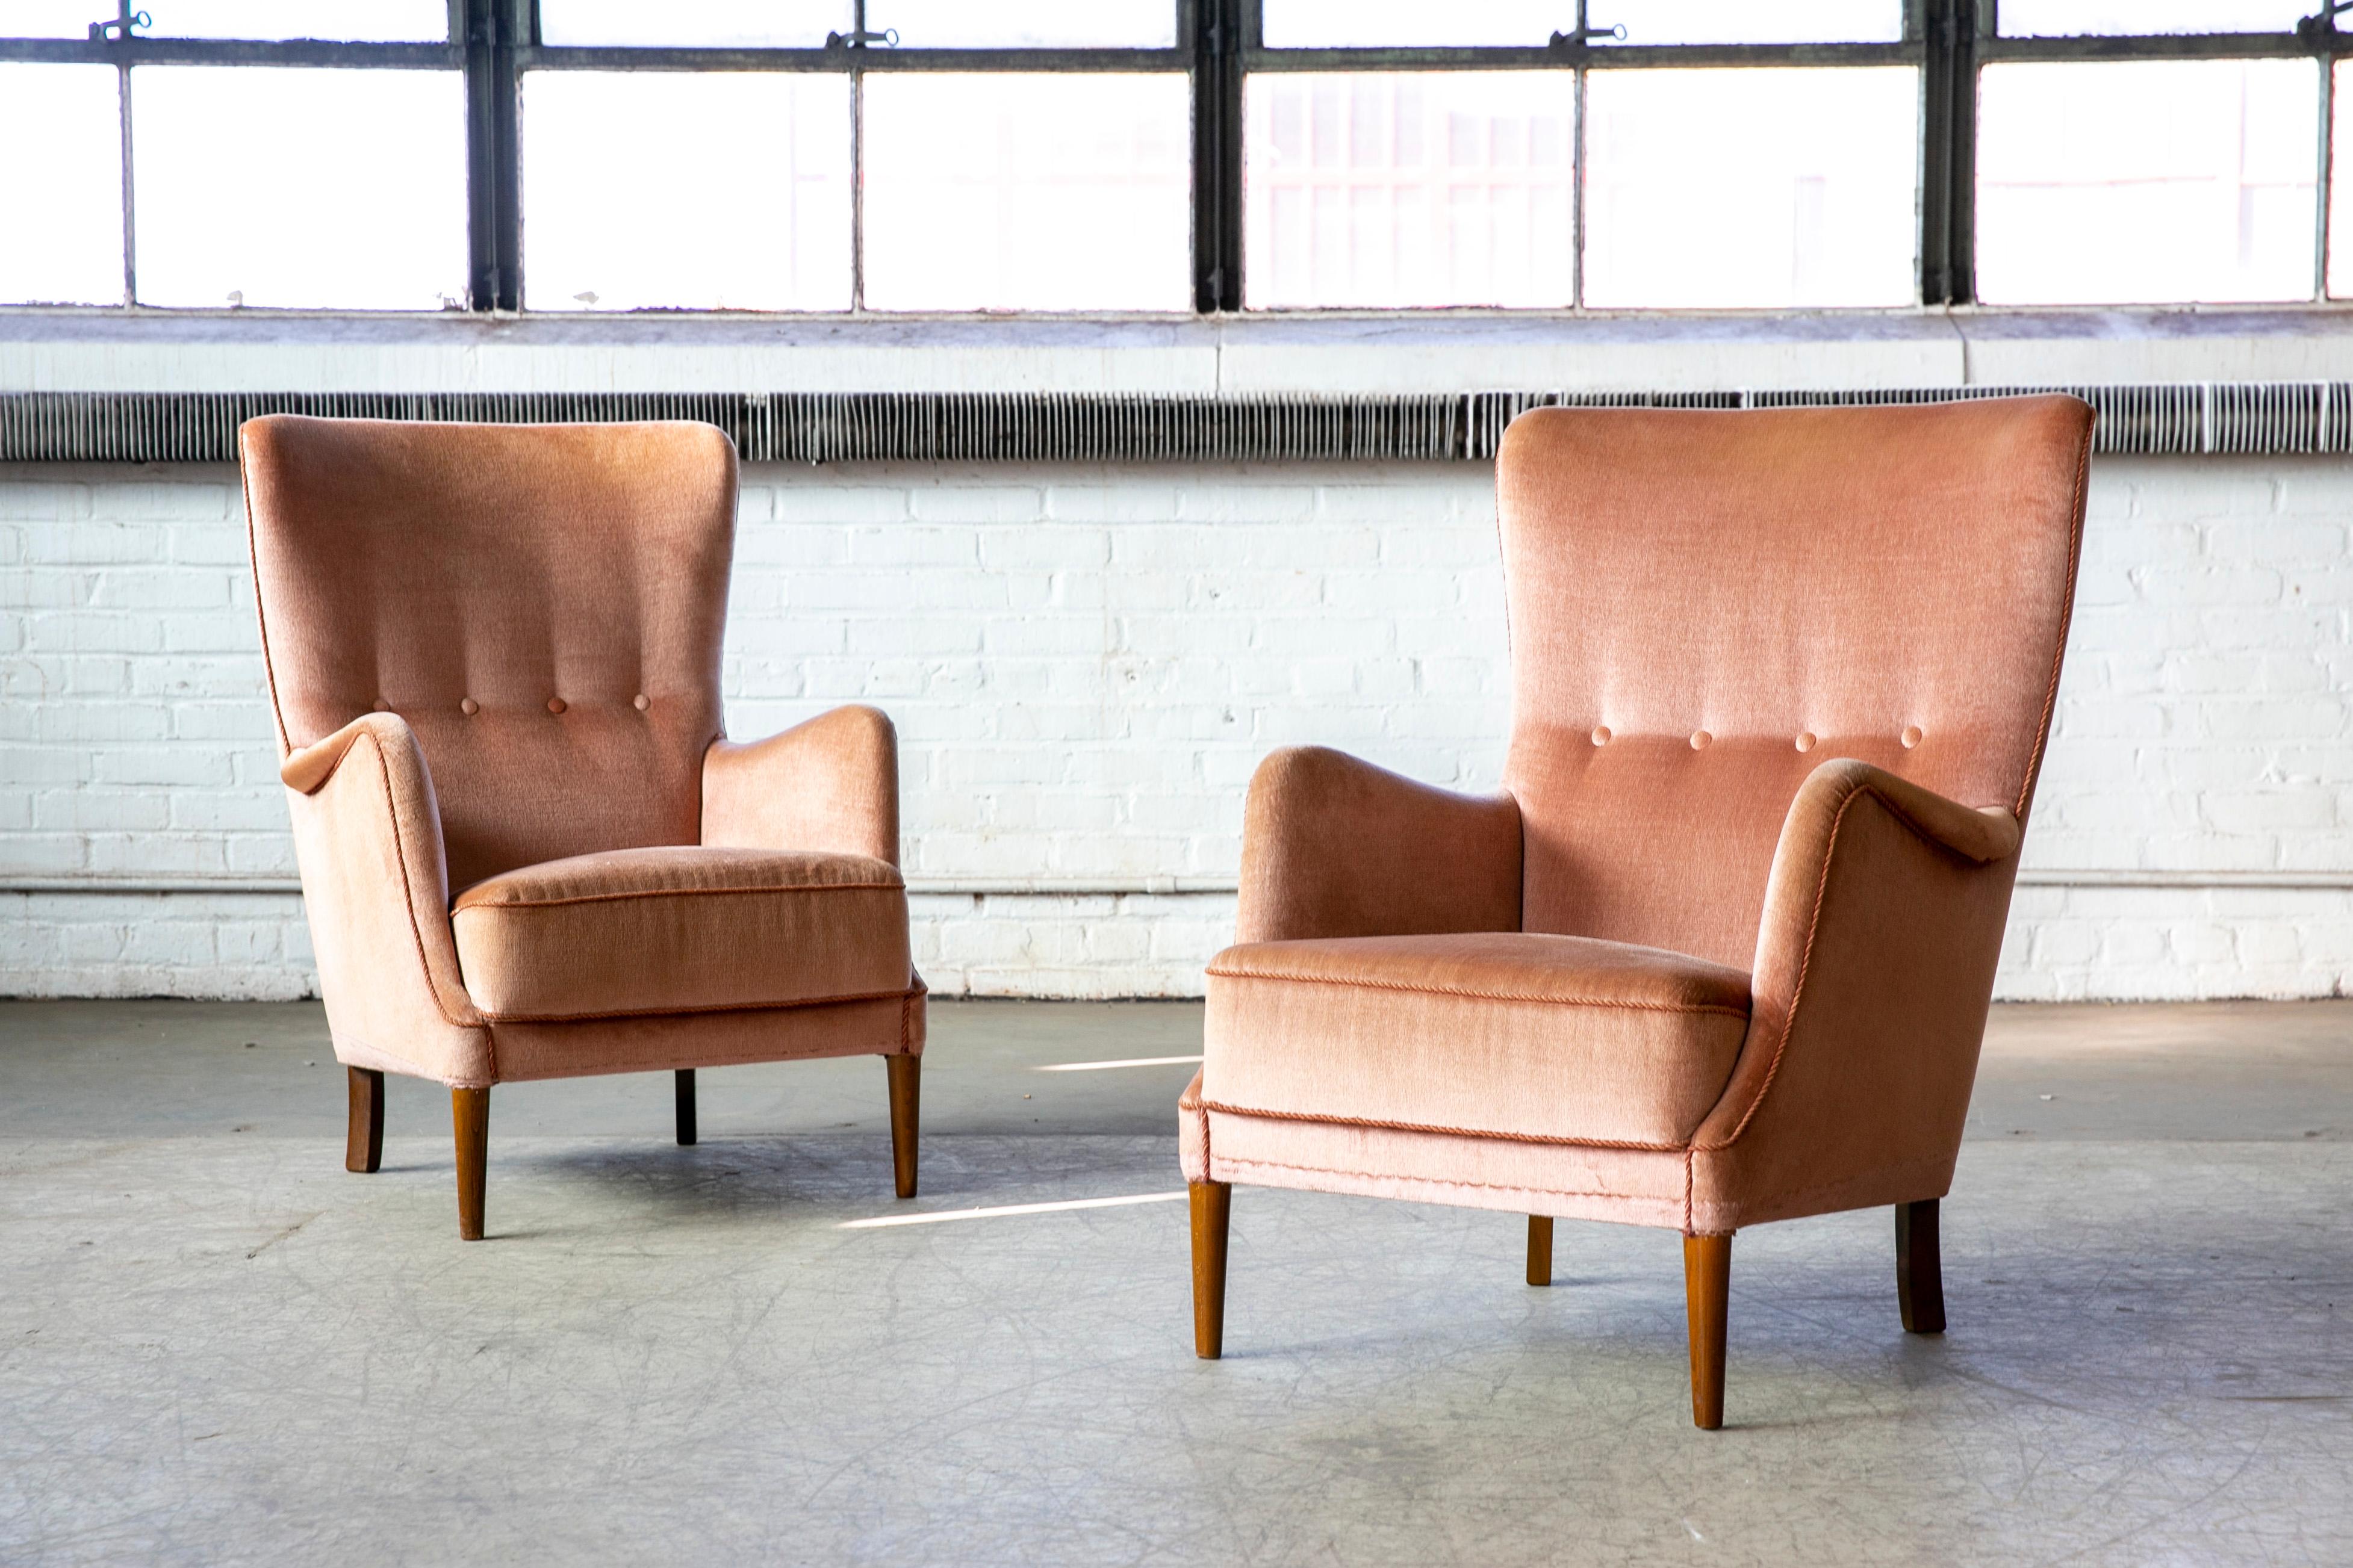 Elegant pair of 1950s lounge chairs attributed to Peter Hvidt and Orla Molgaard made in Denmark between 1940-1950 and most likely manufactured by Fritz Hansen. The chairs exhibit the rolled armrest detail and tapered front legs often preferred by